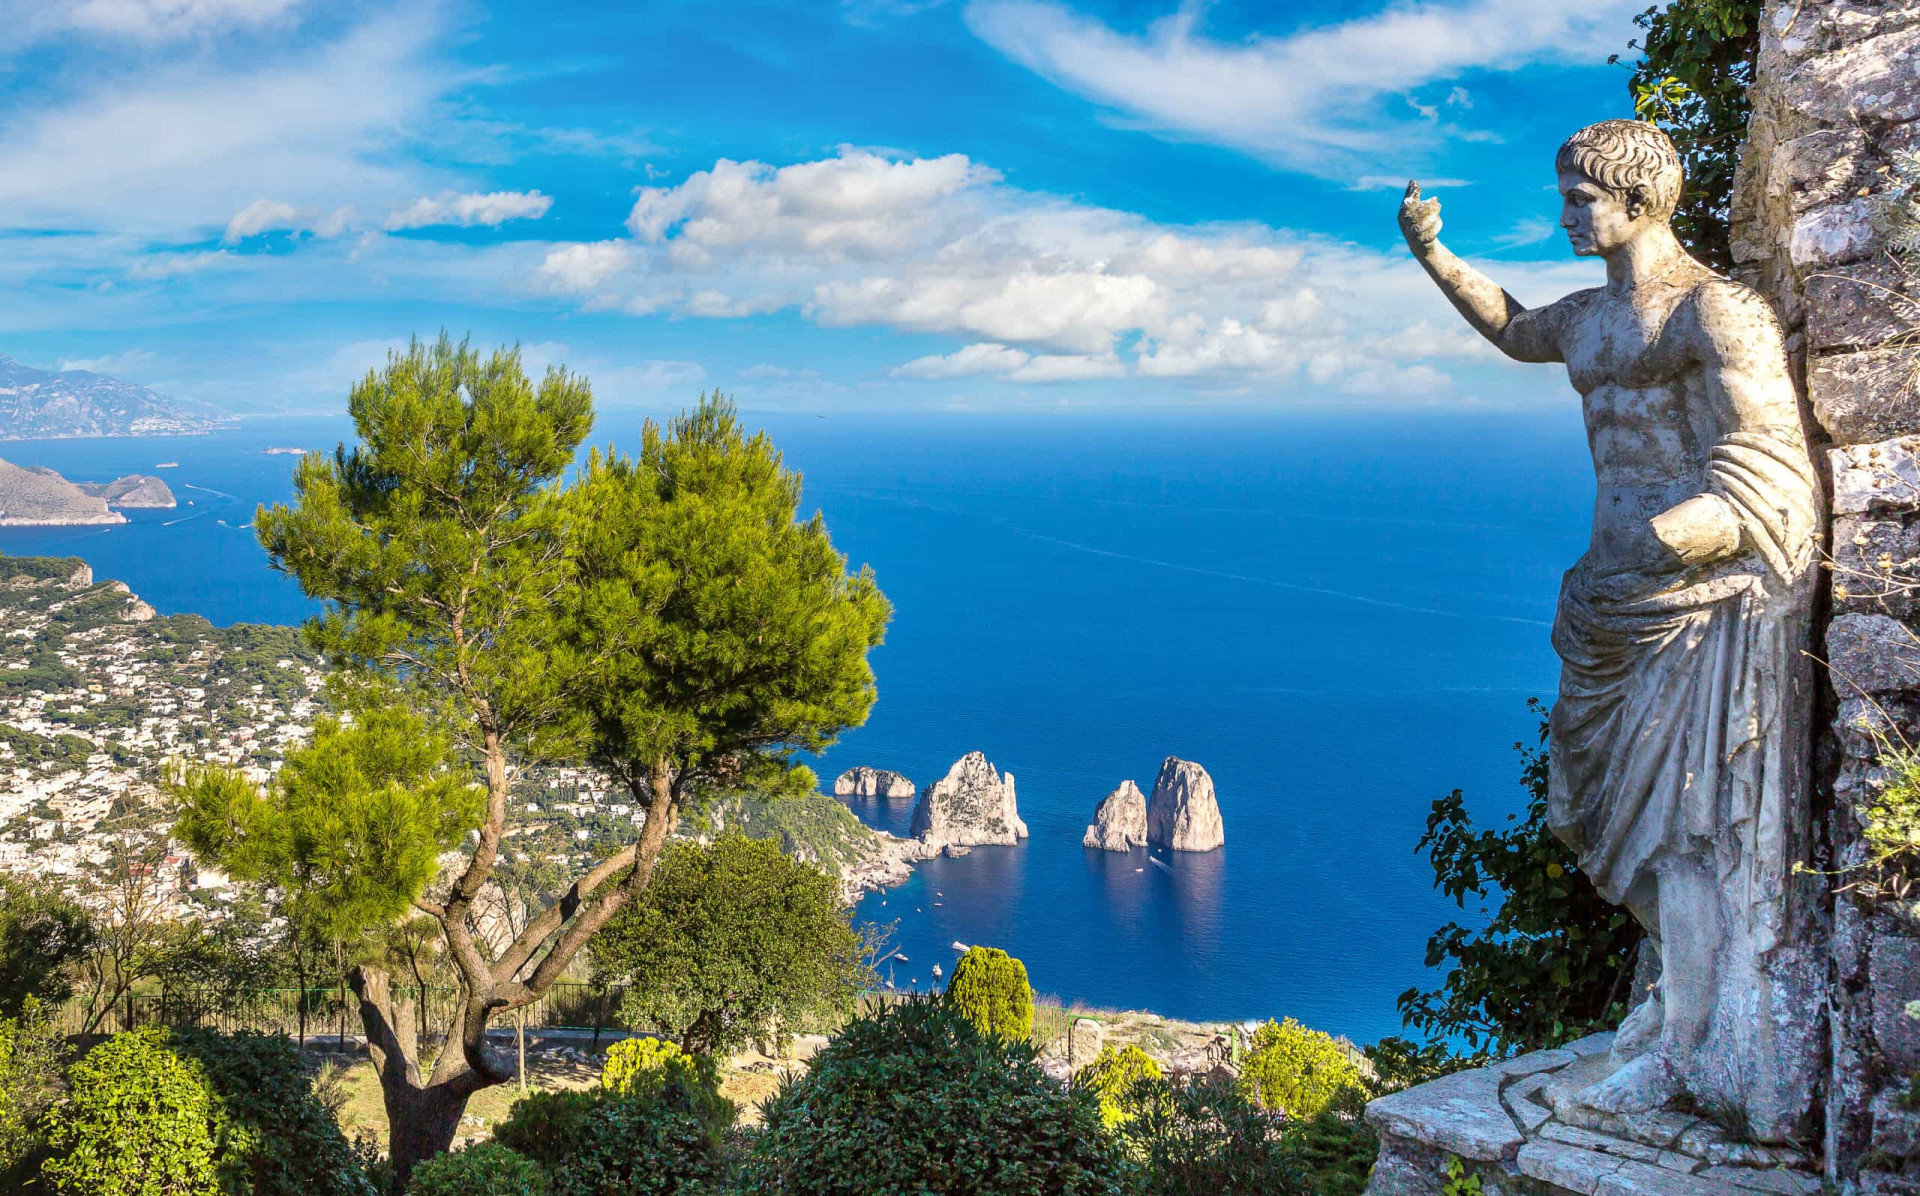 <p>Anchored in the Bay of Naples, Capri deserves a mention for its landscape of wild beauty sculpted by wind, sea, and centuries of human occupation, dating back at least to Roman times.</p>